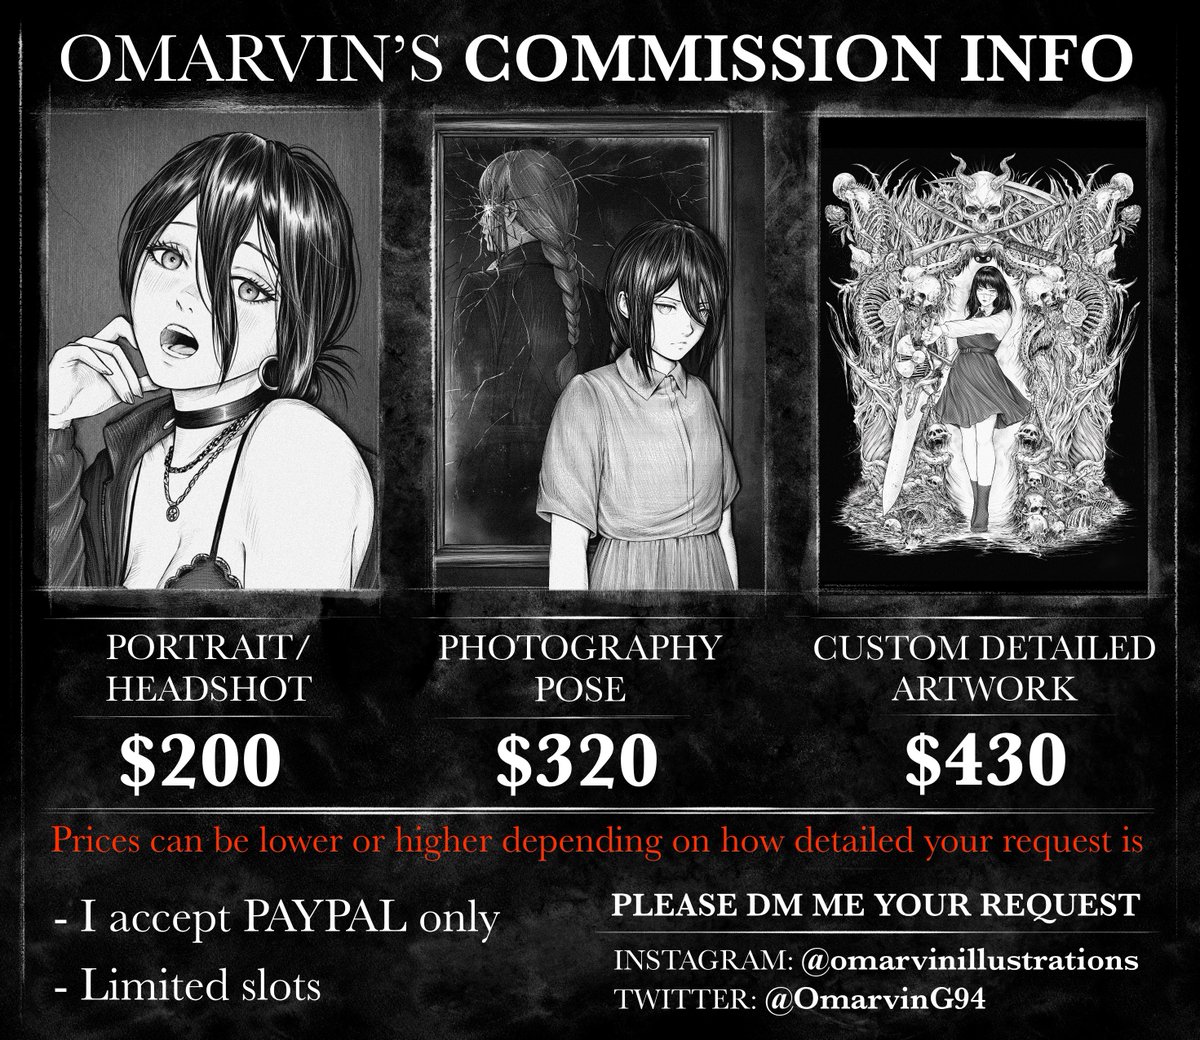 COMMISSIONS ARE NOW OPEN!